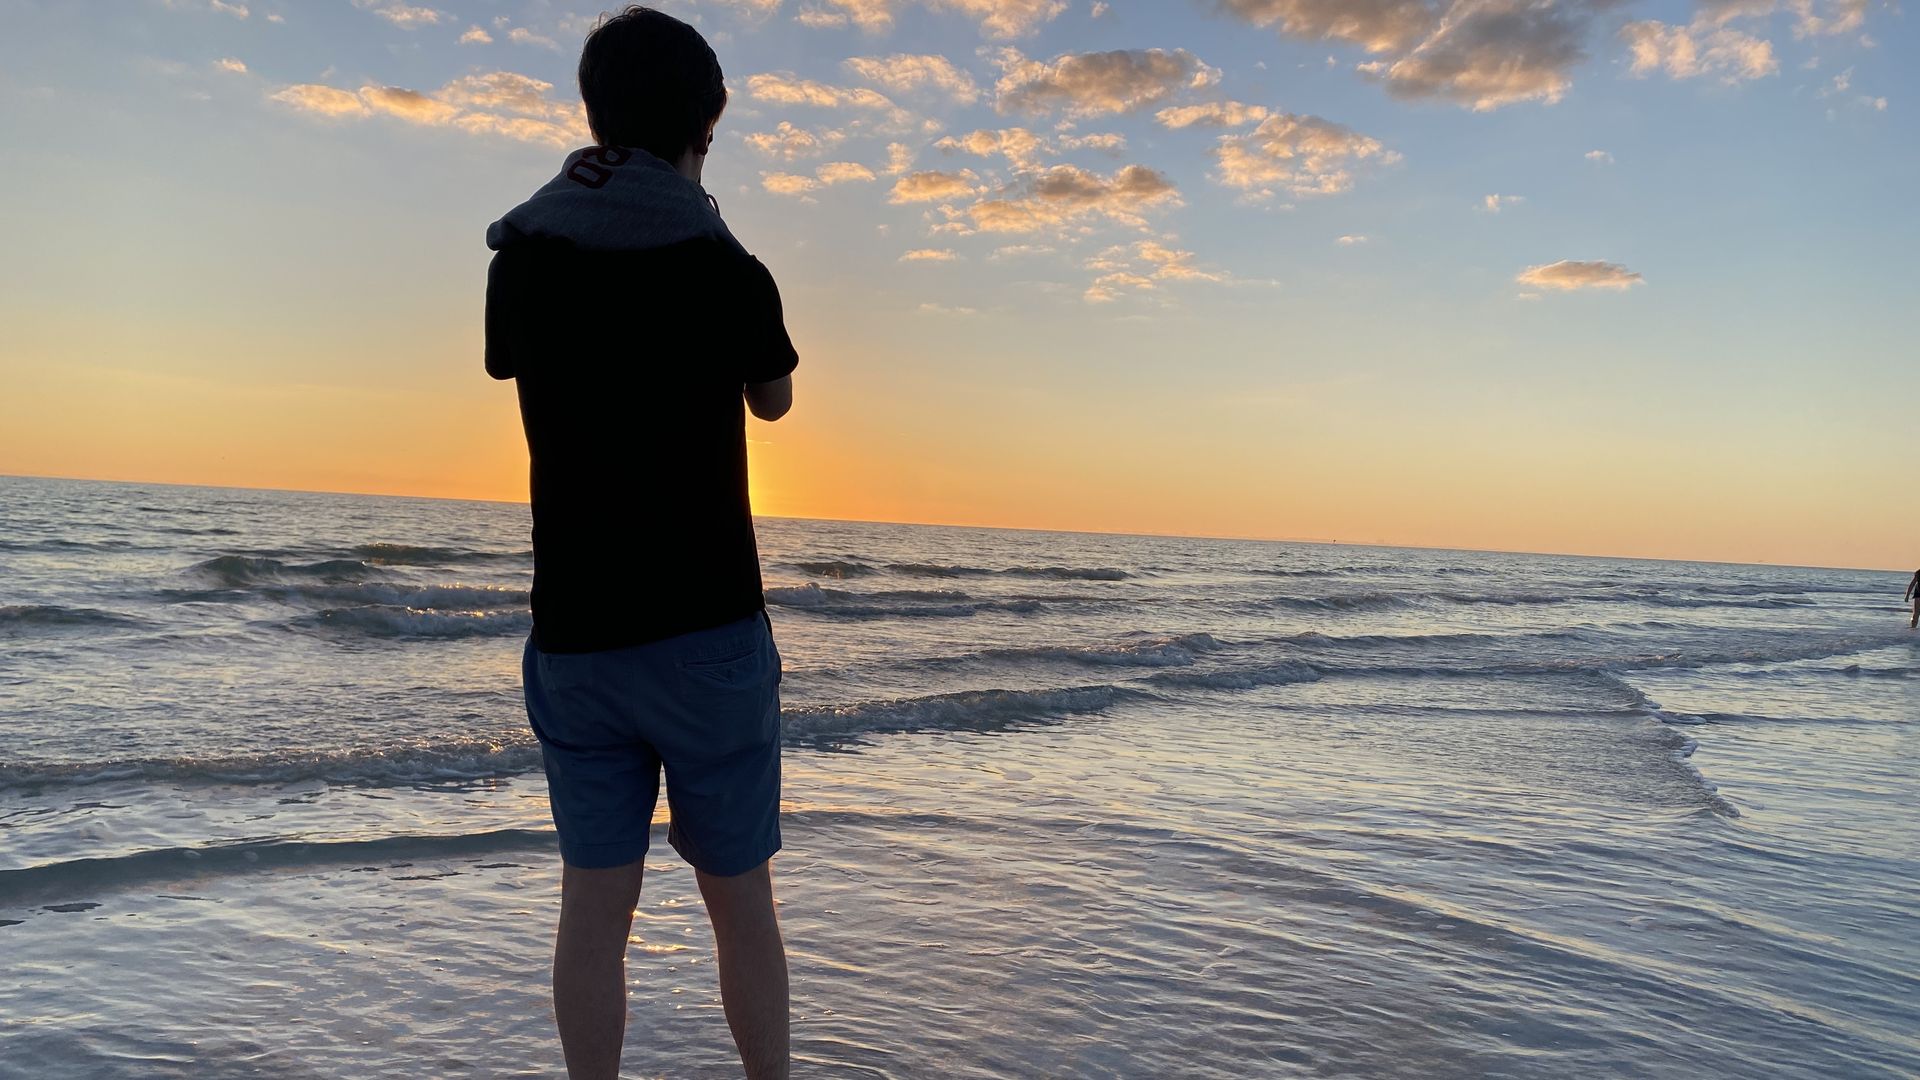 Silhouette of Shane taking in the sunset at Lido Beach